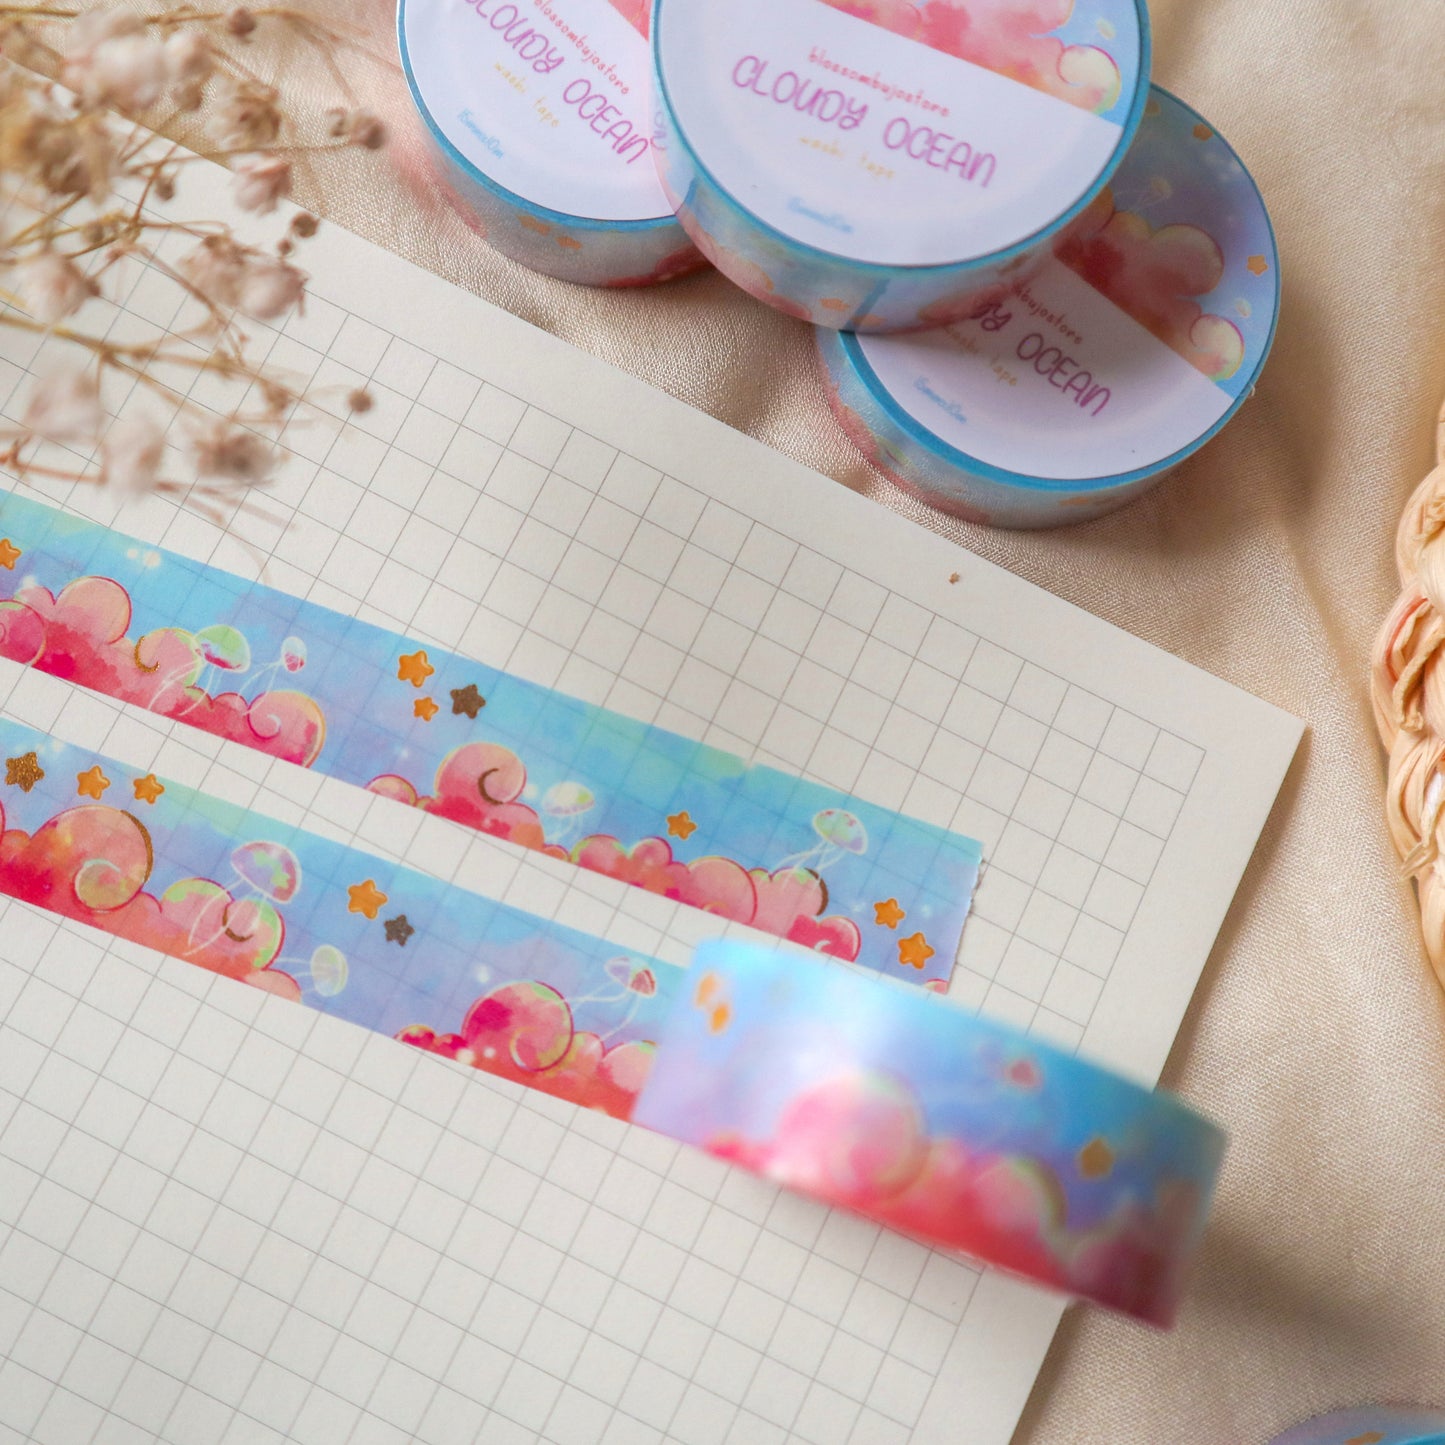 Washi Tape Gold Foiled - Cloudy Ocean